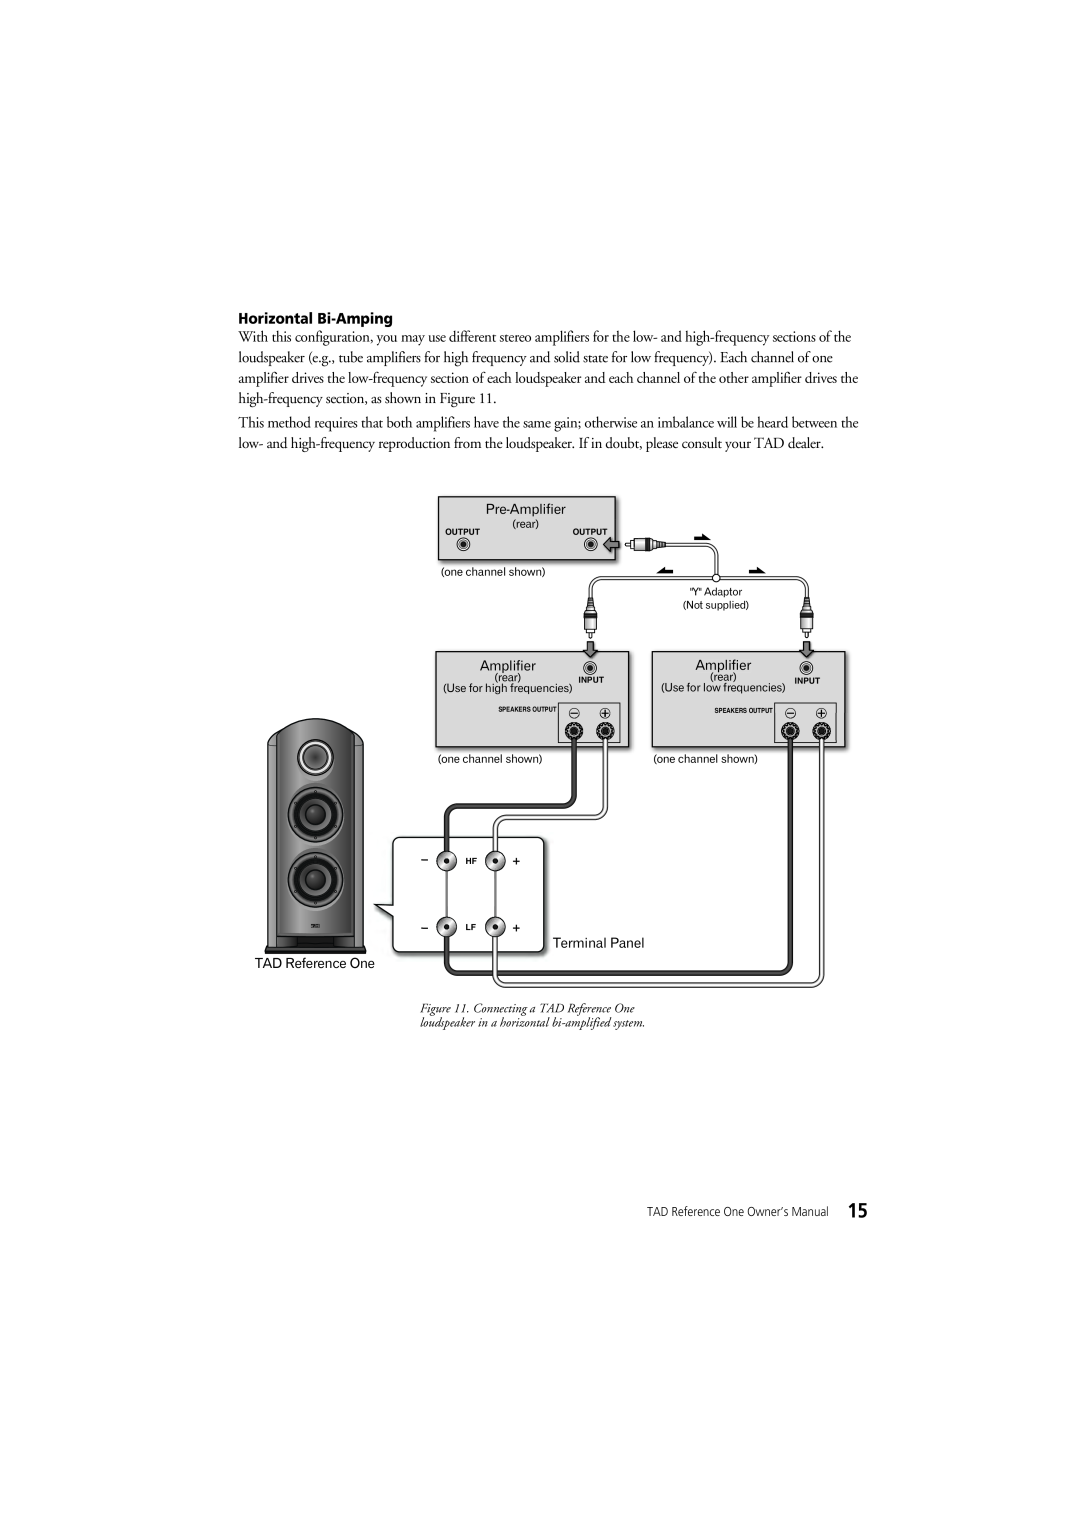 Pioneer TAD-R1 owner manual Horizontal Bi-Amping, rear, one channel shown, Use for high, Use for low 